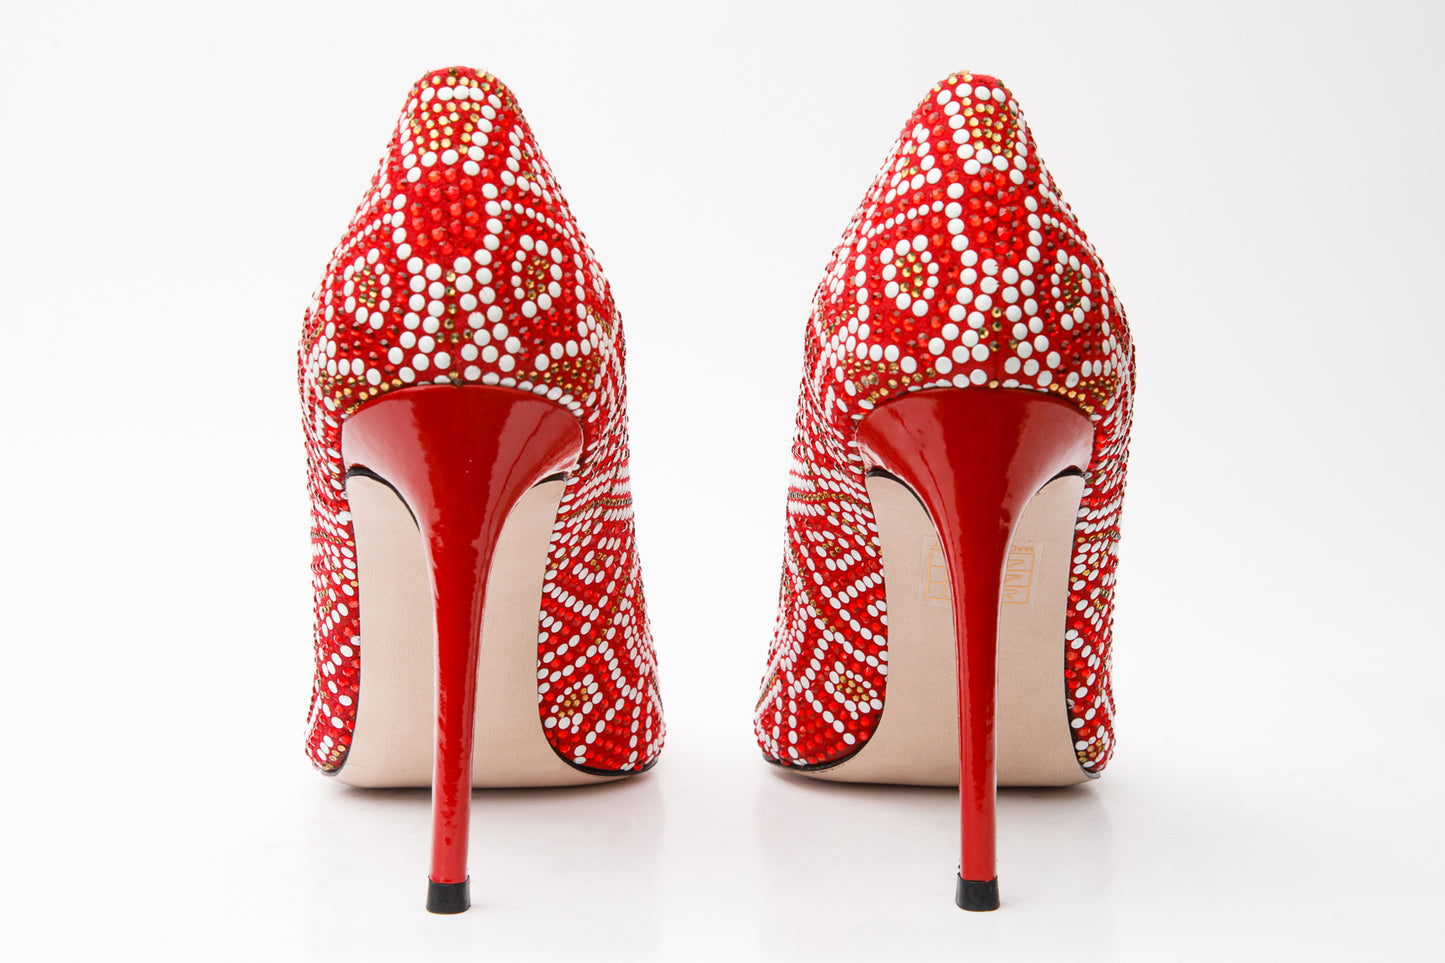 The Nampula Red Glitter Leather Pump Women Shoe